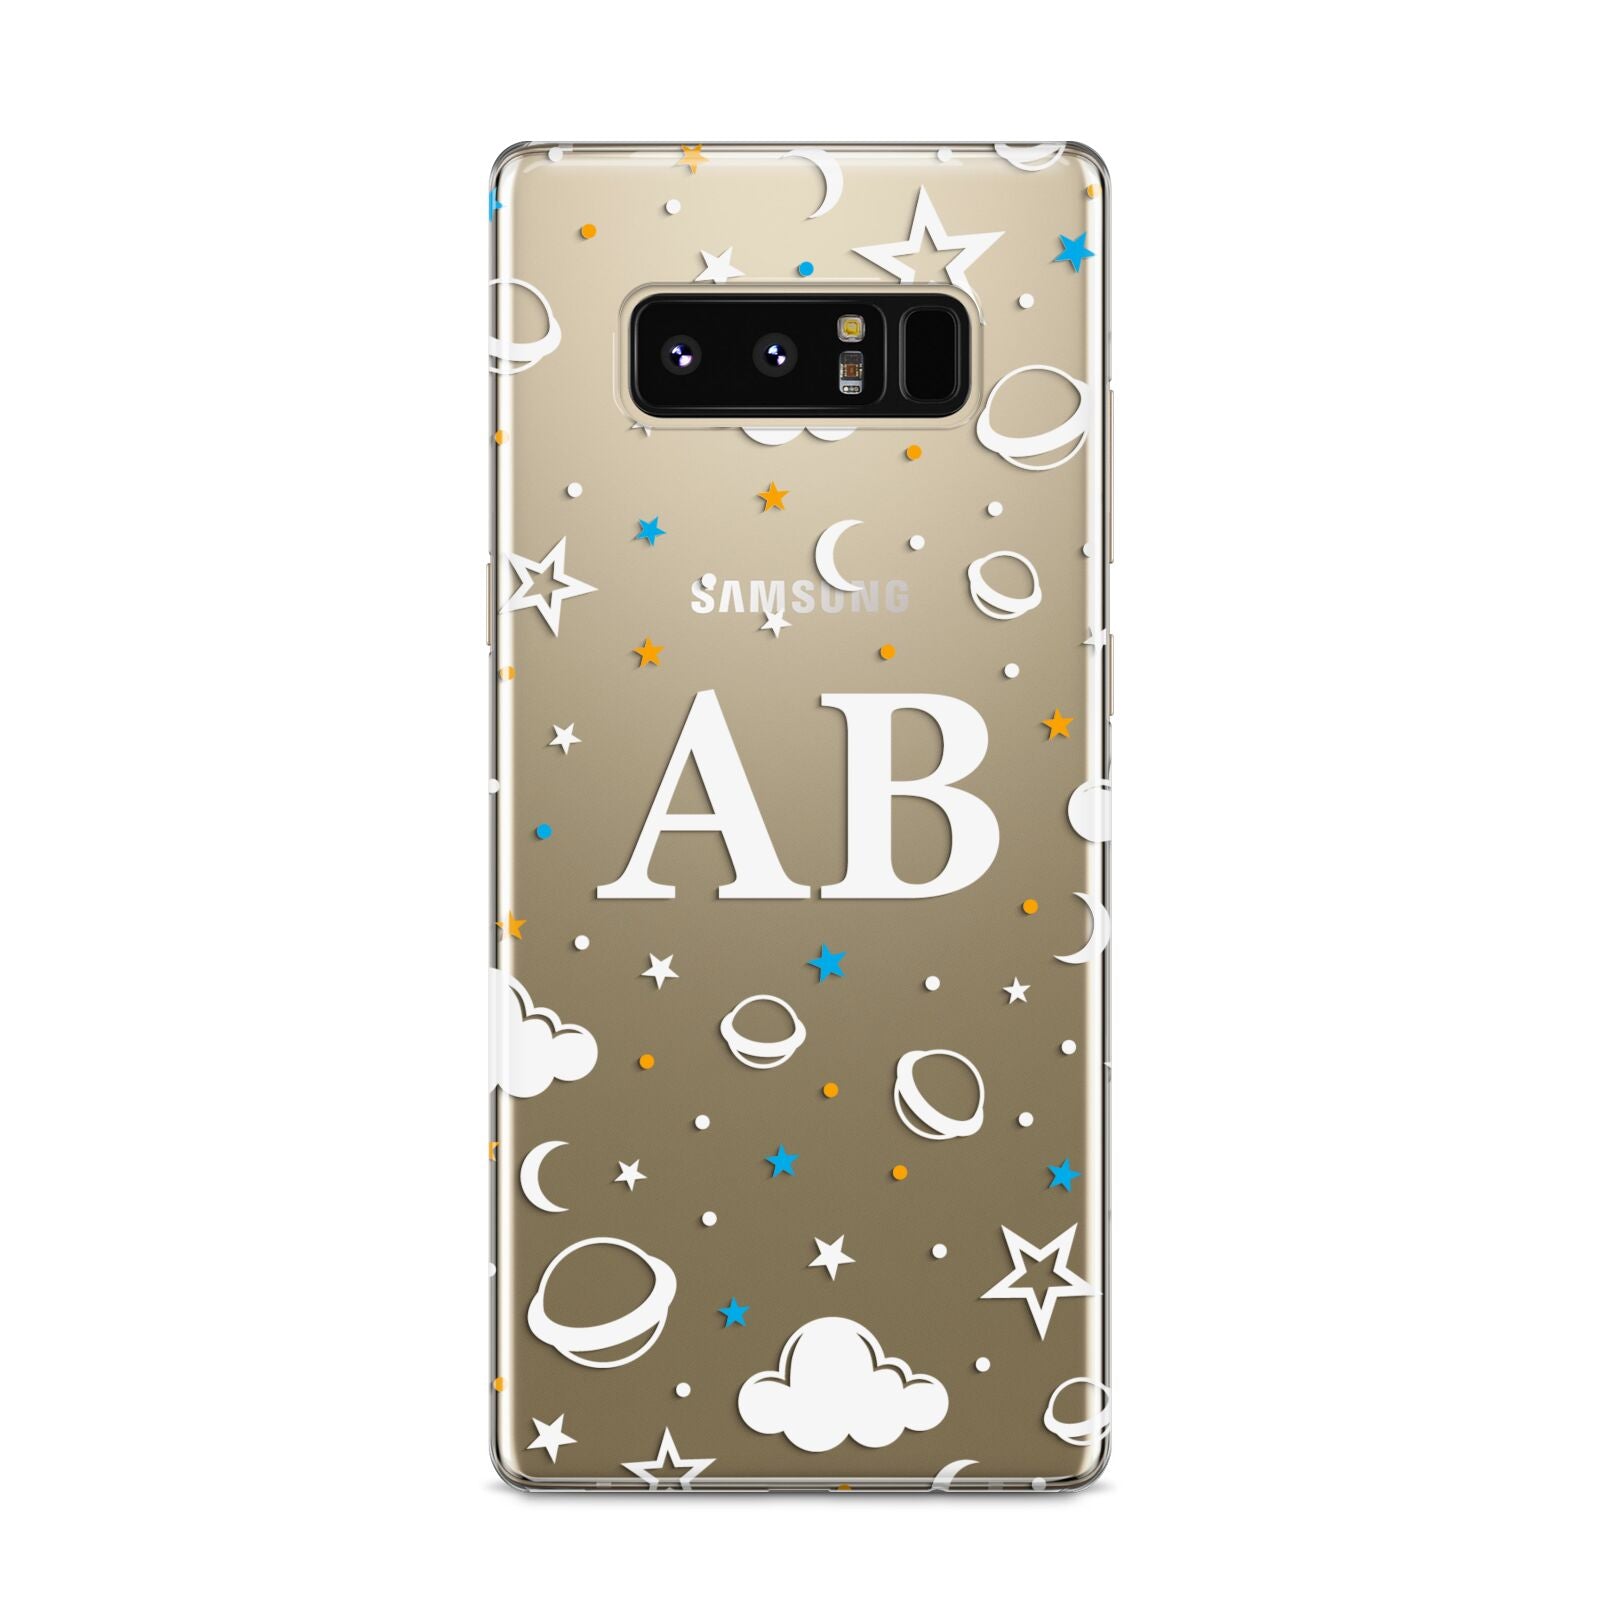 Astronomical Initials Samsung Galaxy S8 Case